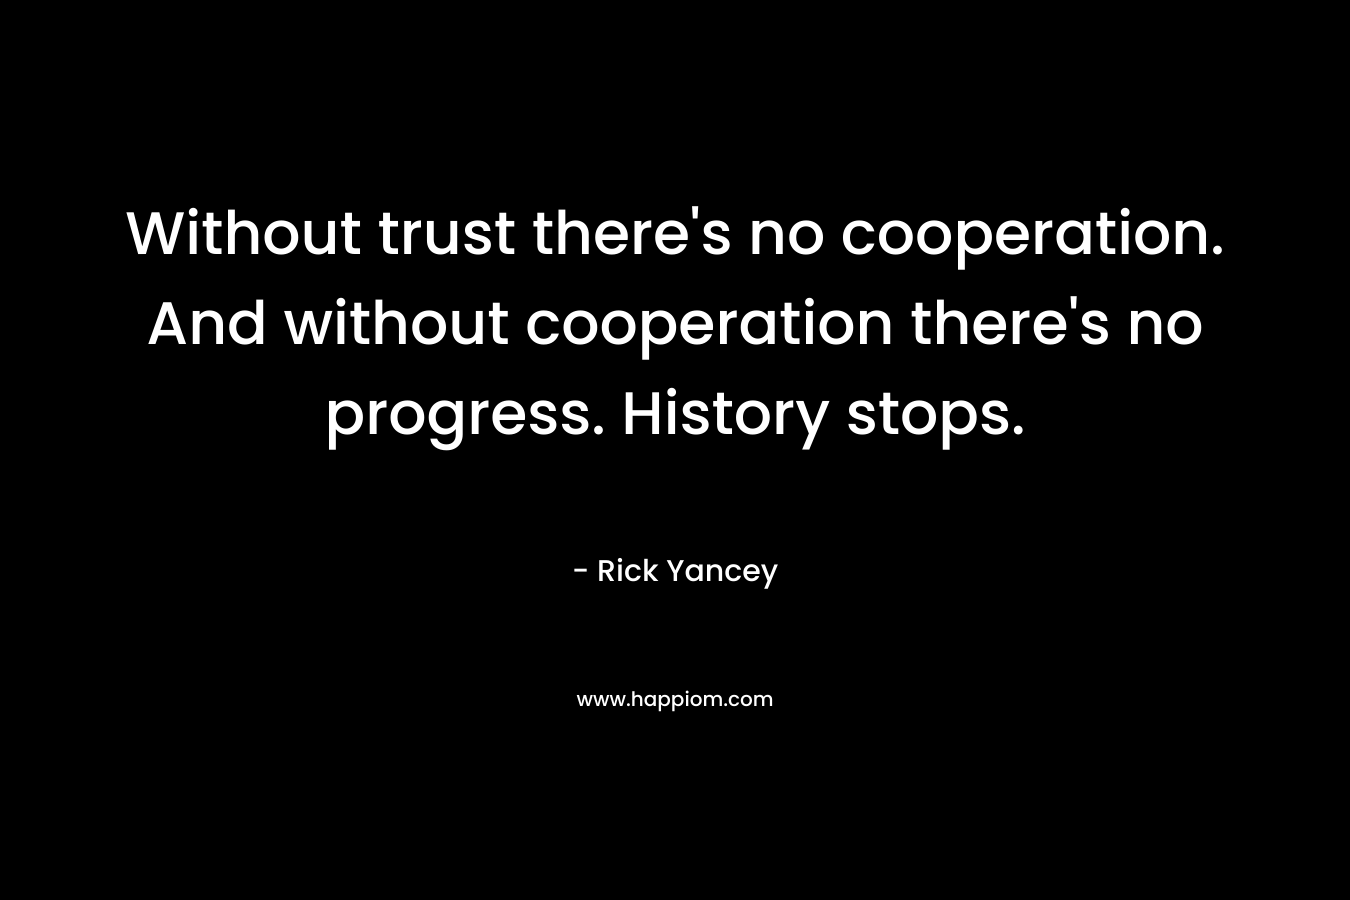 Without trust there's no cooperation. And without cooperation there's no progress. History stops.